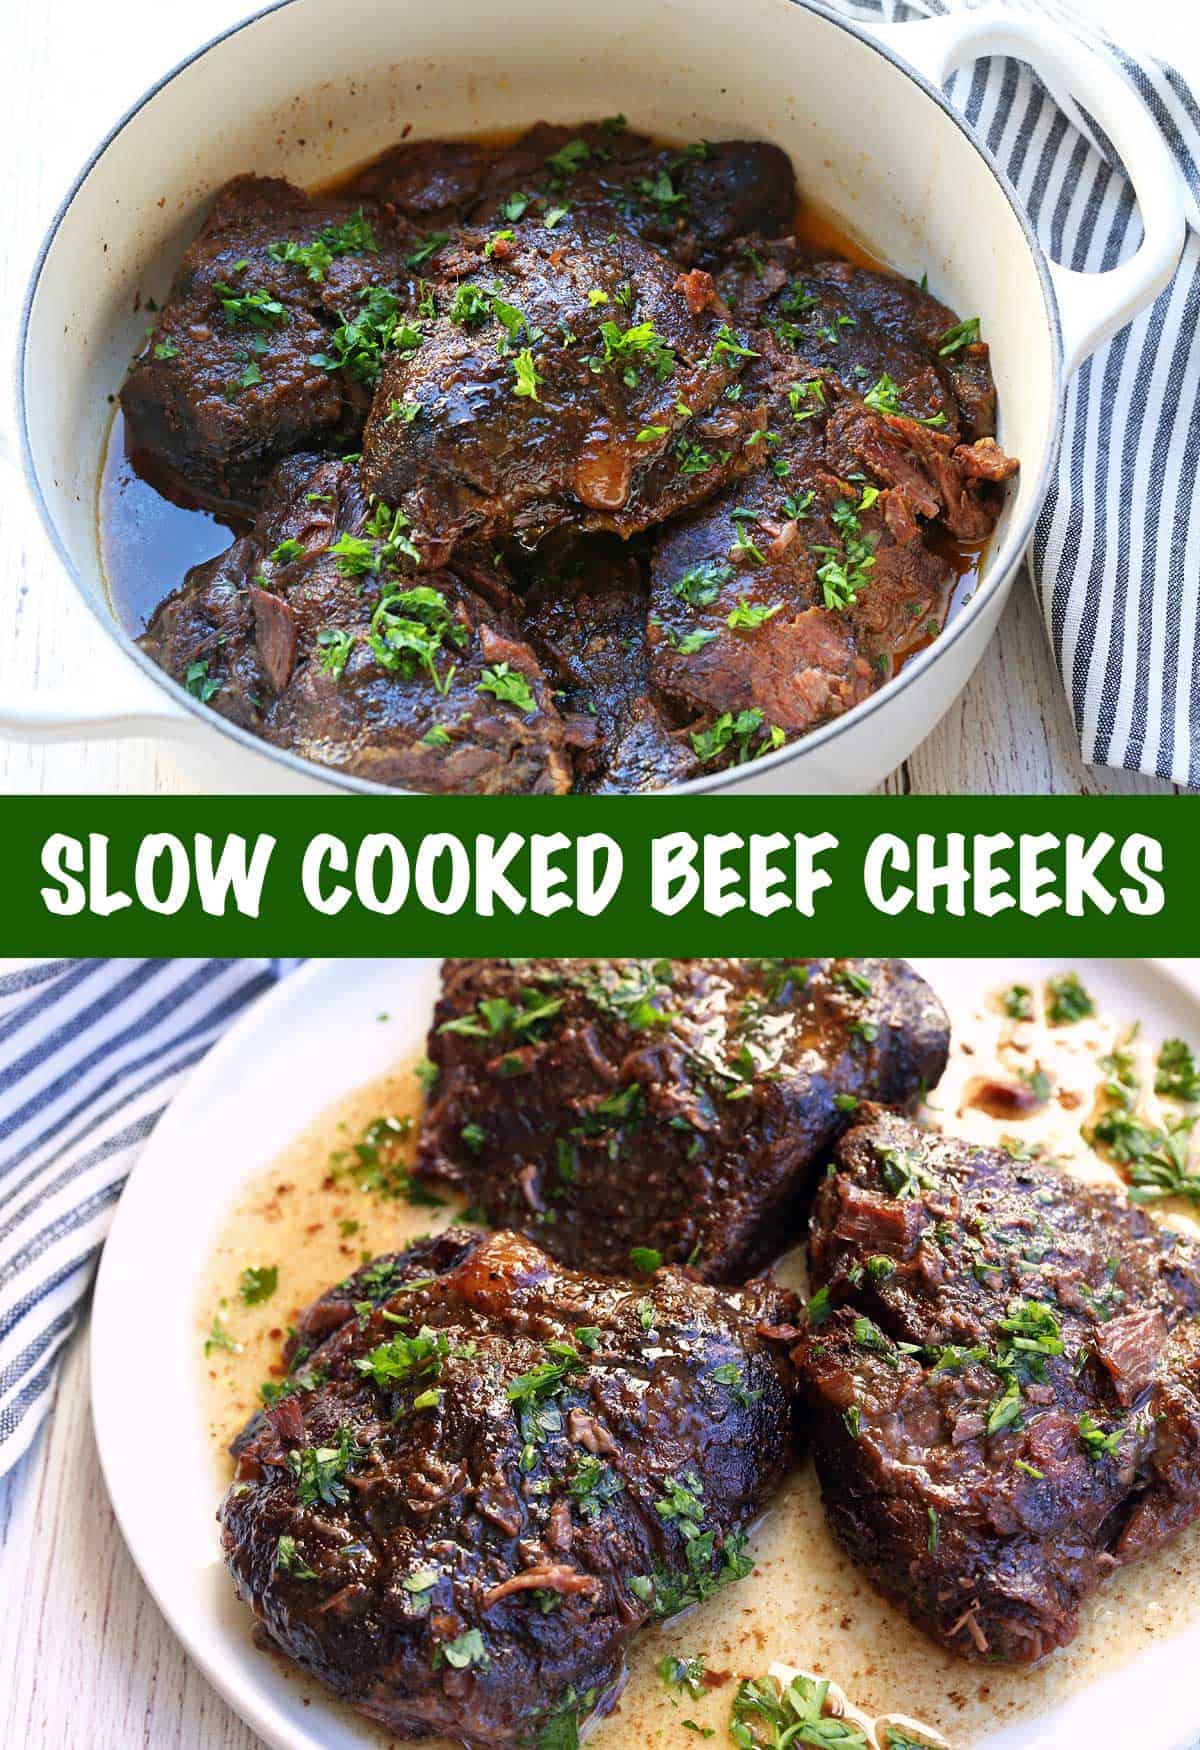 Two photos of slow cooked beef cheeks, one in a pot and one served on a plate. 